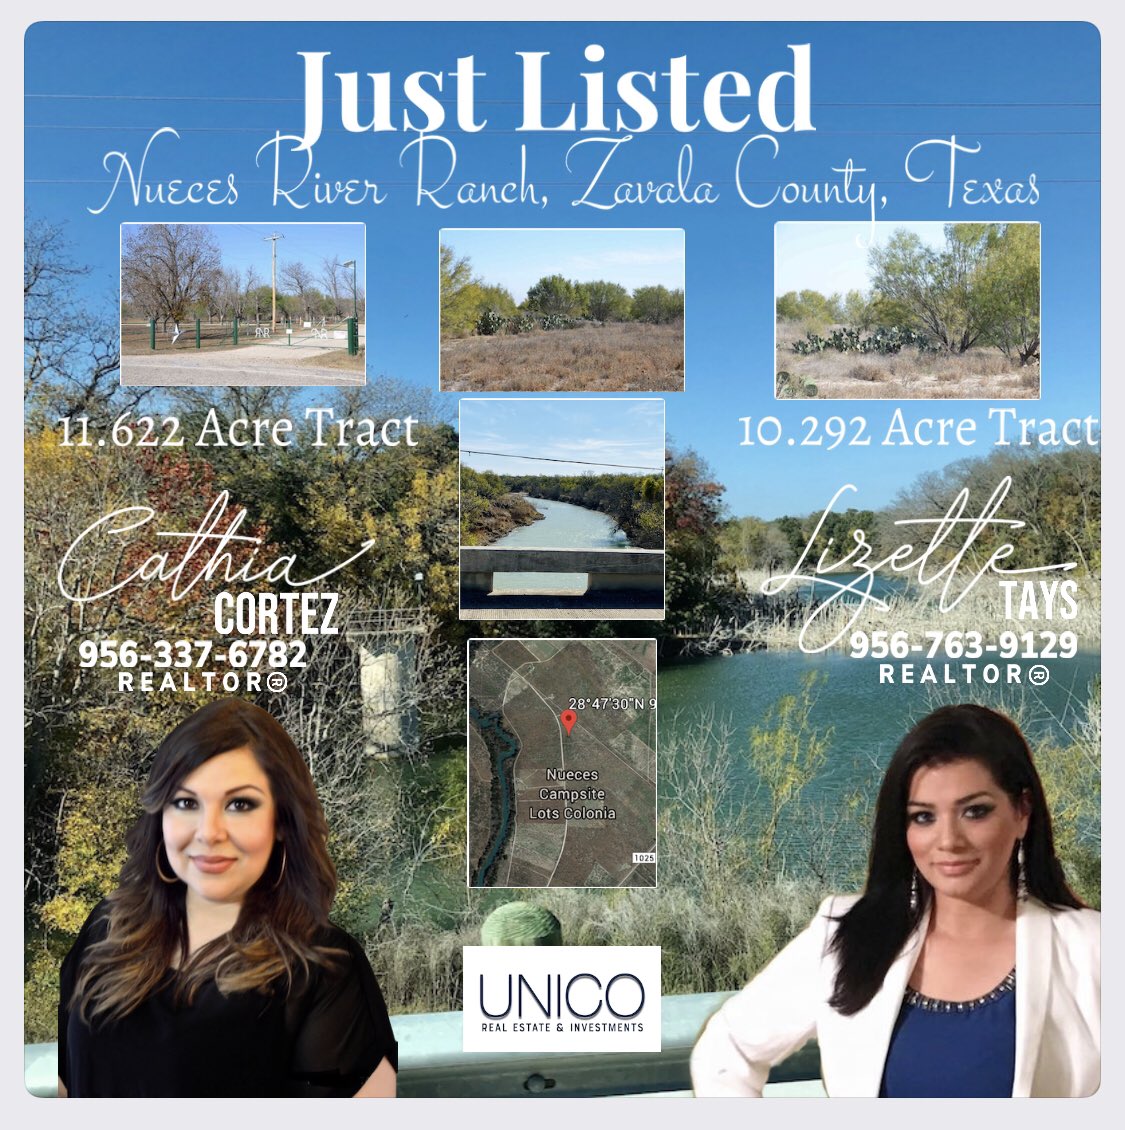 Sneak peek at some of my  available listings! Call me for your real estate needs! 📲
#ListWithLiz #BuyWithLiz #SellWithLiz #TexasRealtor